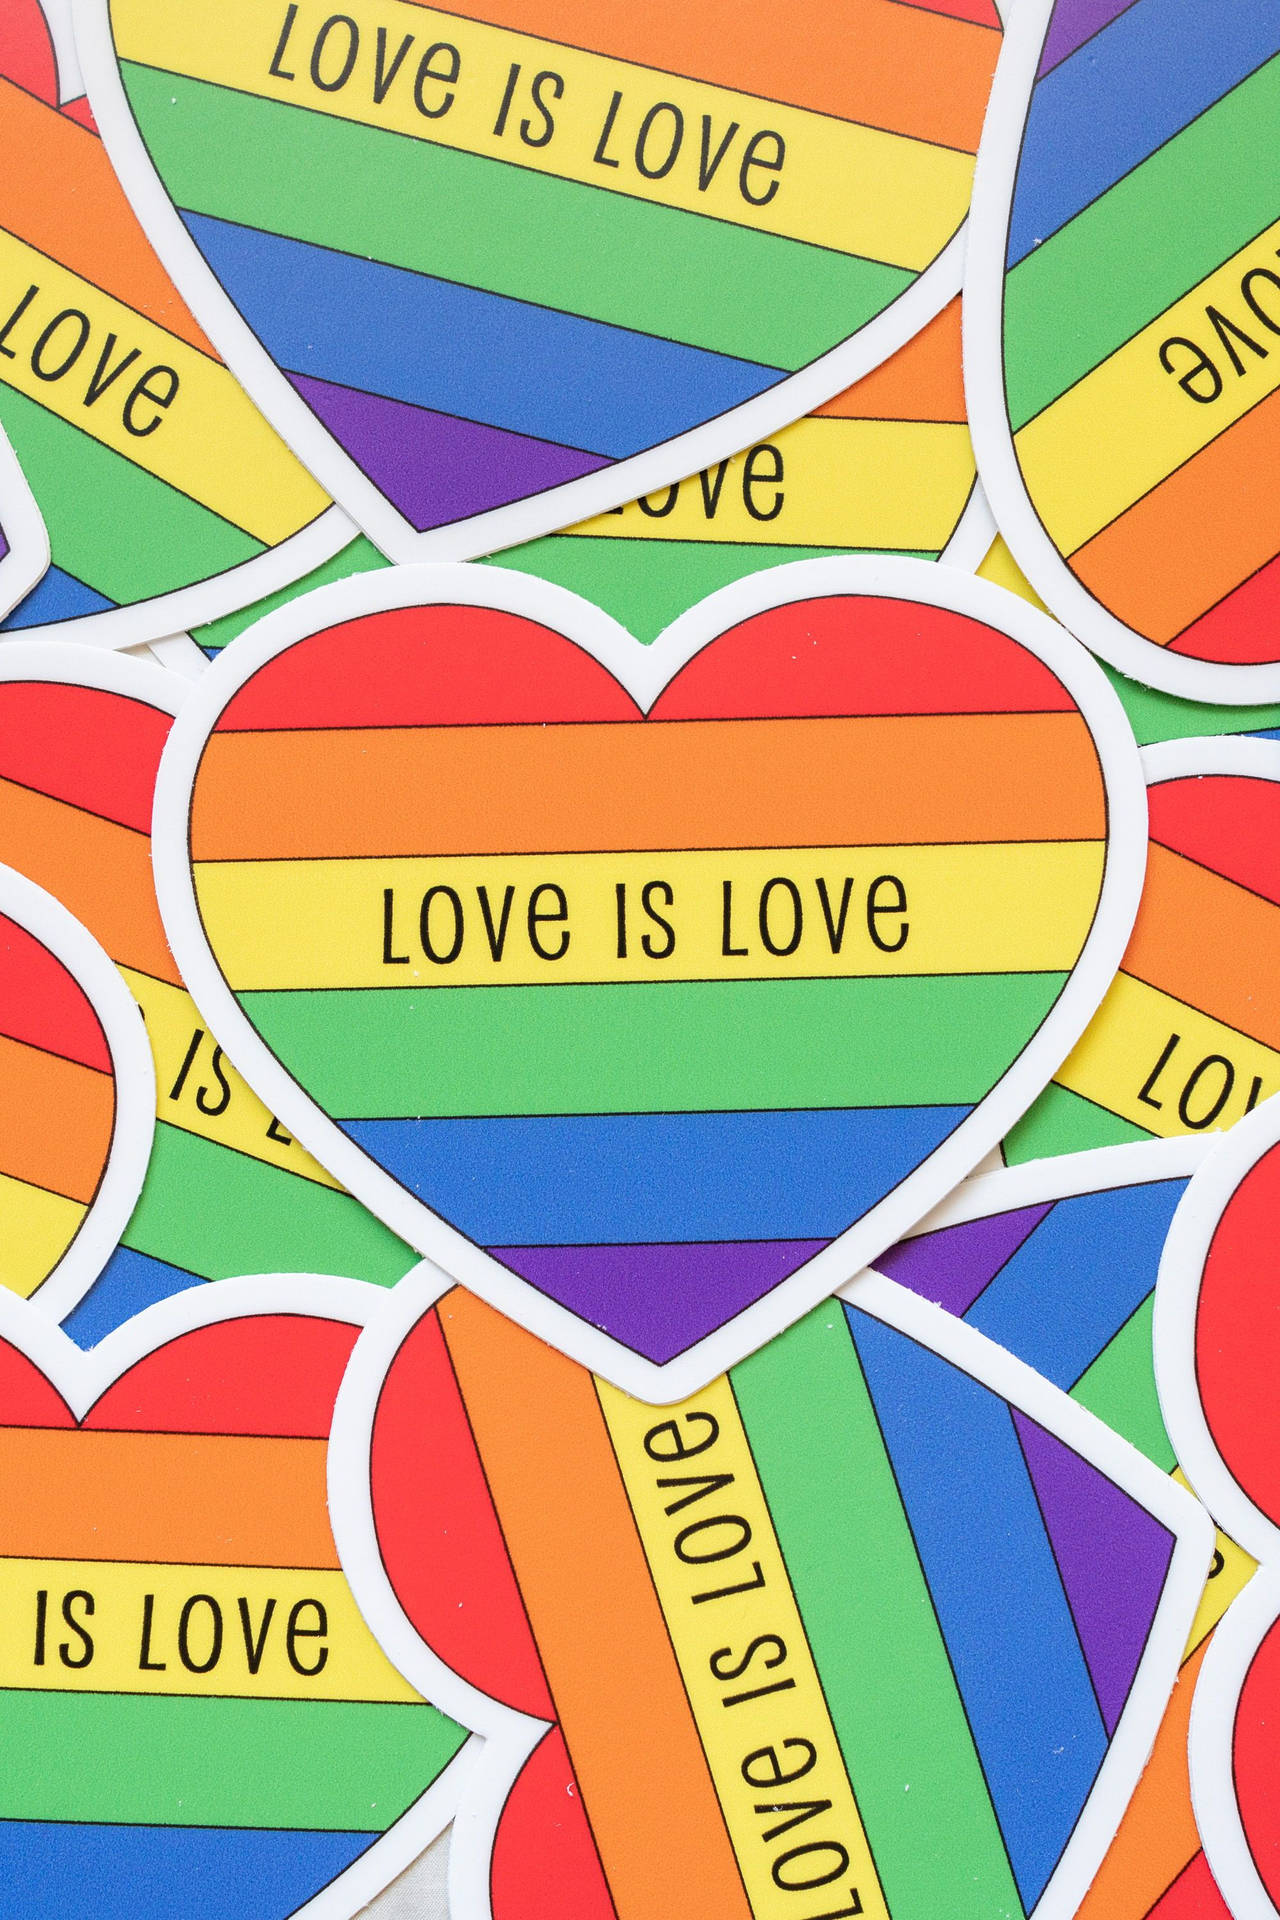 Free Love Is Love Wallpaper Downloads, [100+] Love Is Love Wallpapers for  FREE 